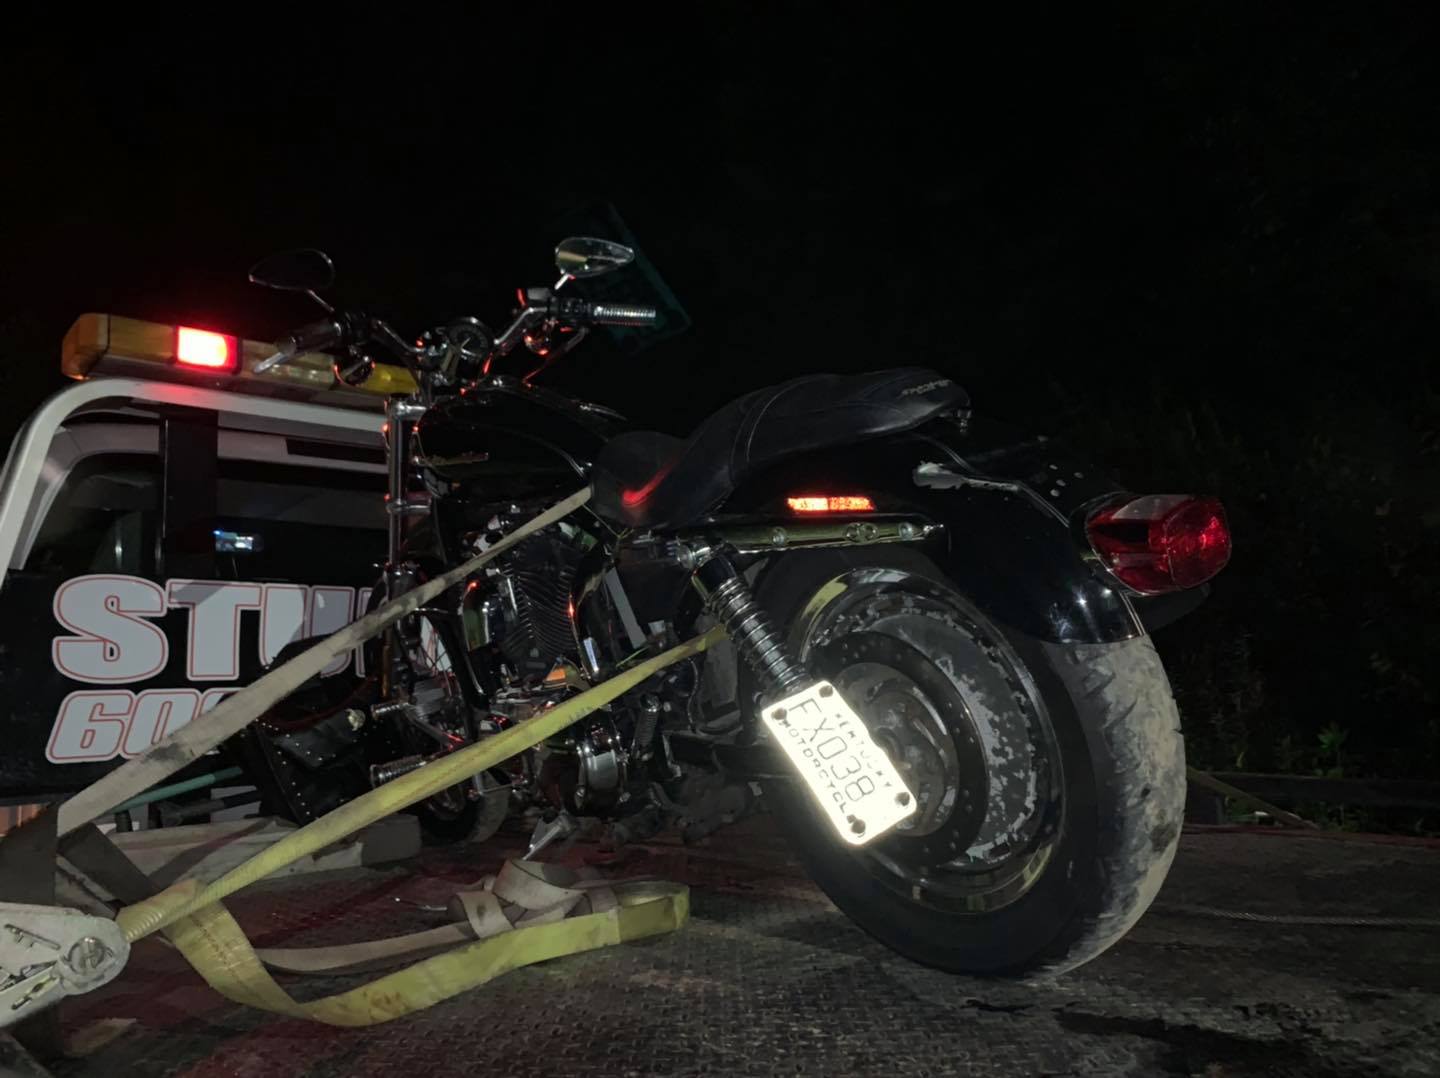 Motorcyclist arrested after chase